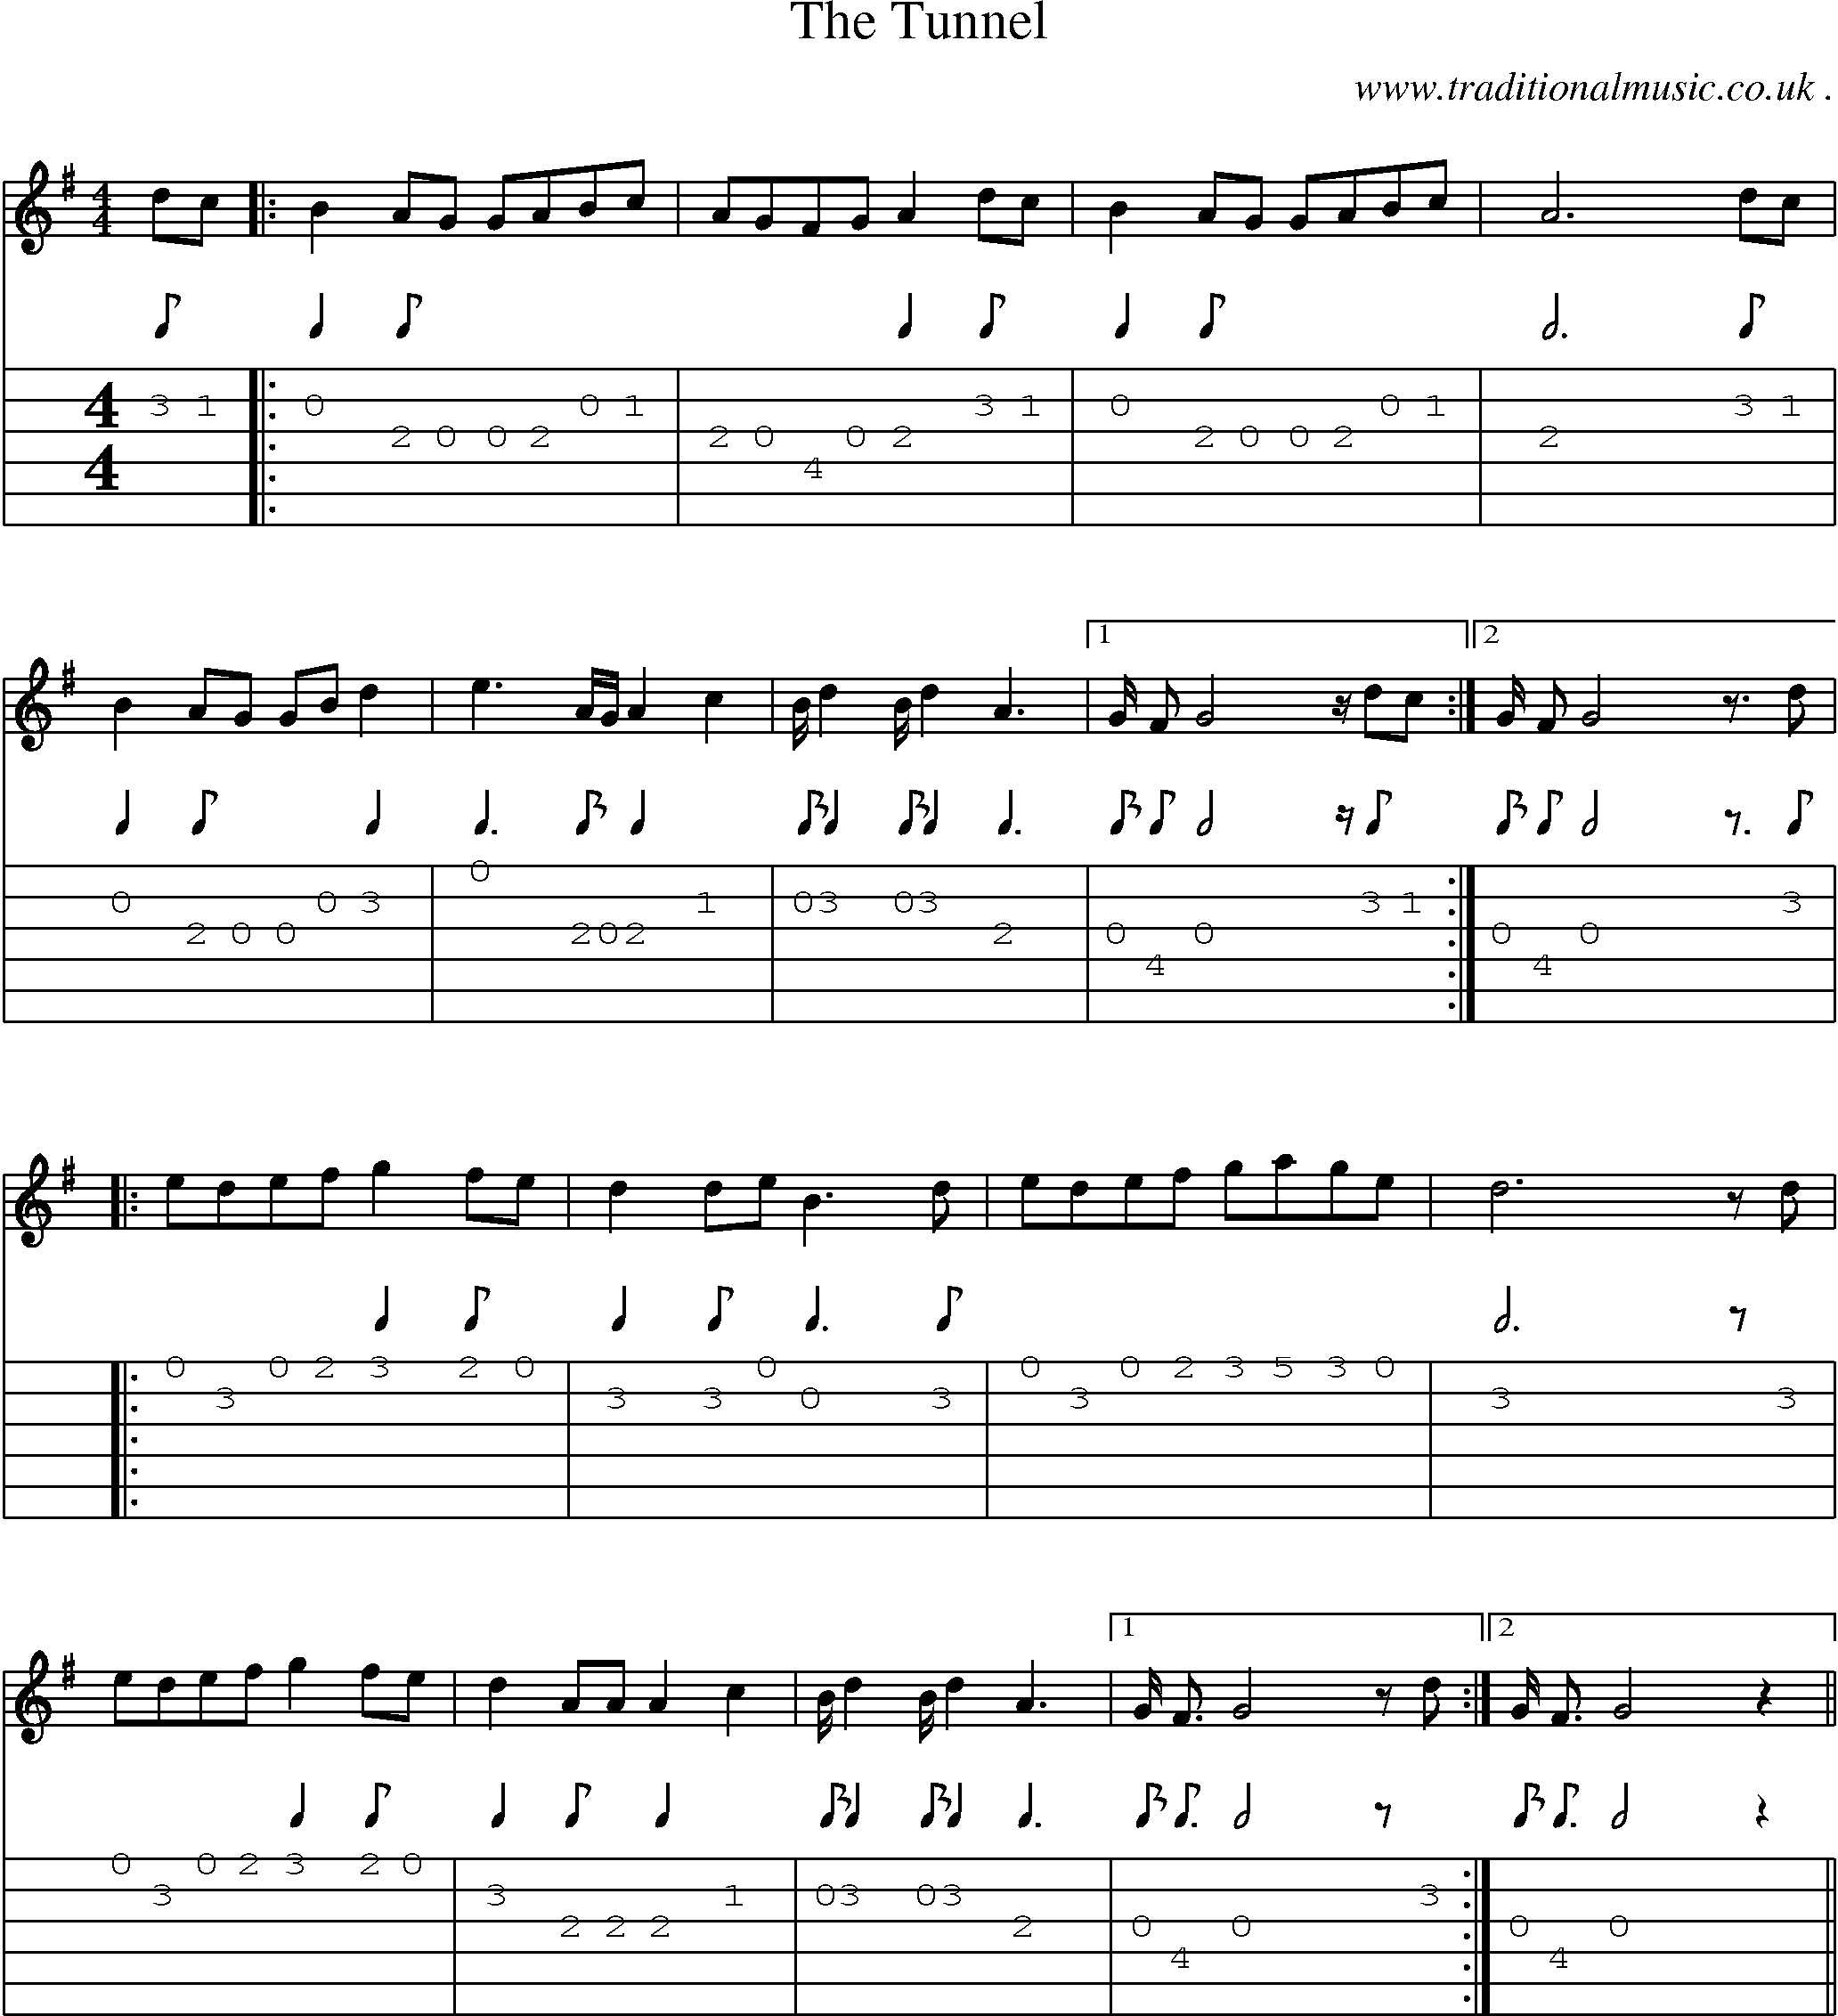 Sheet-Music and Guitar Tabs for The Tunnel